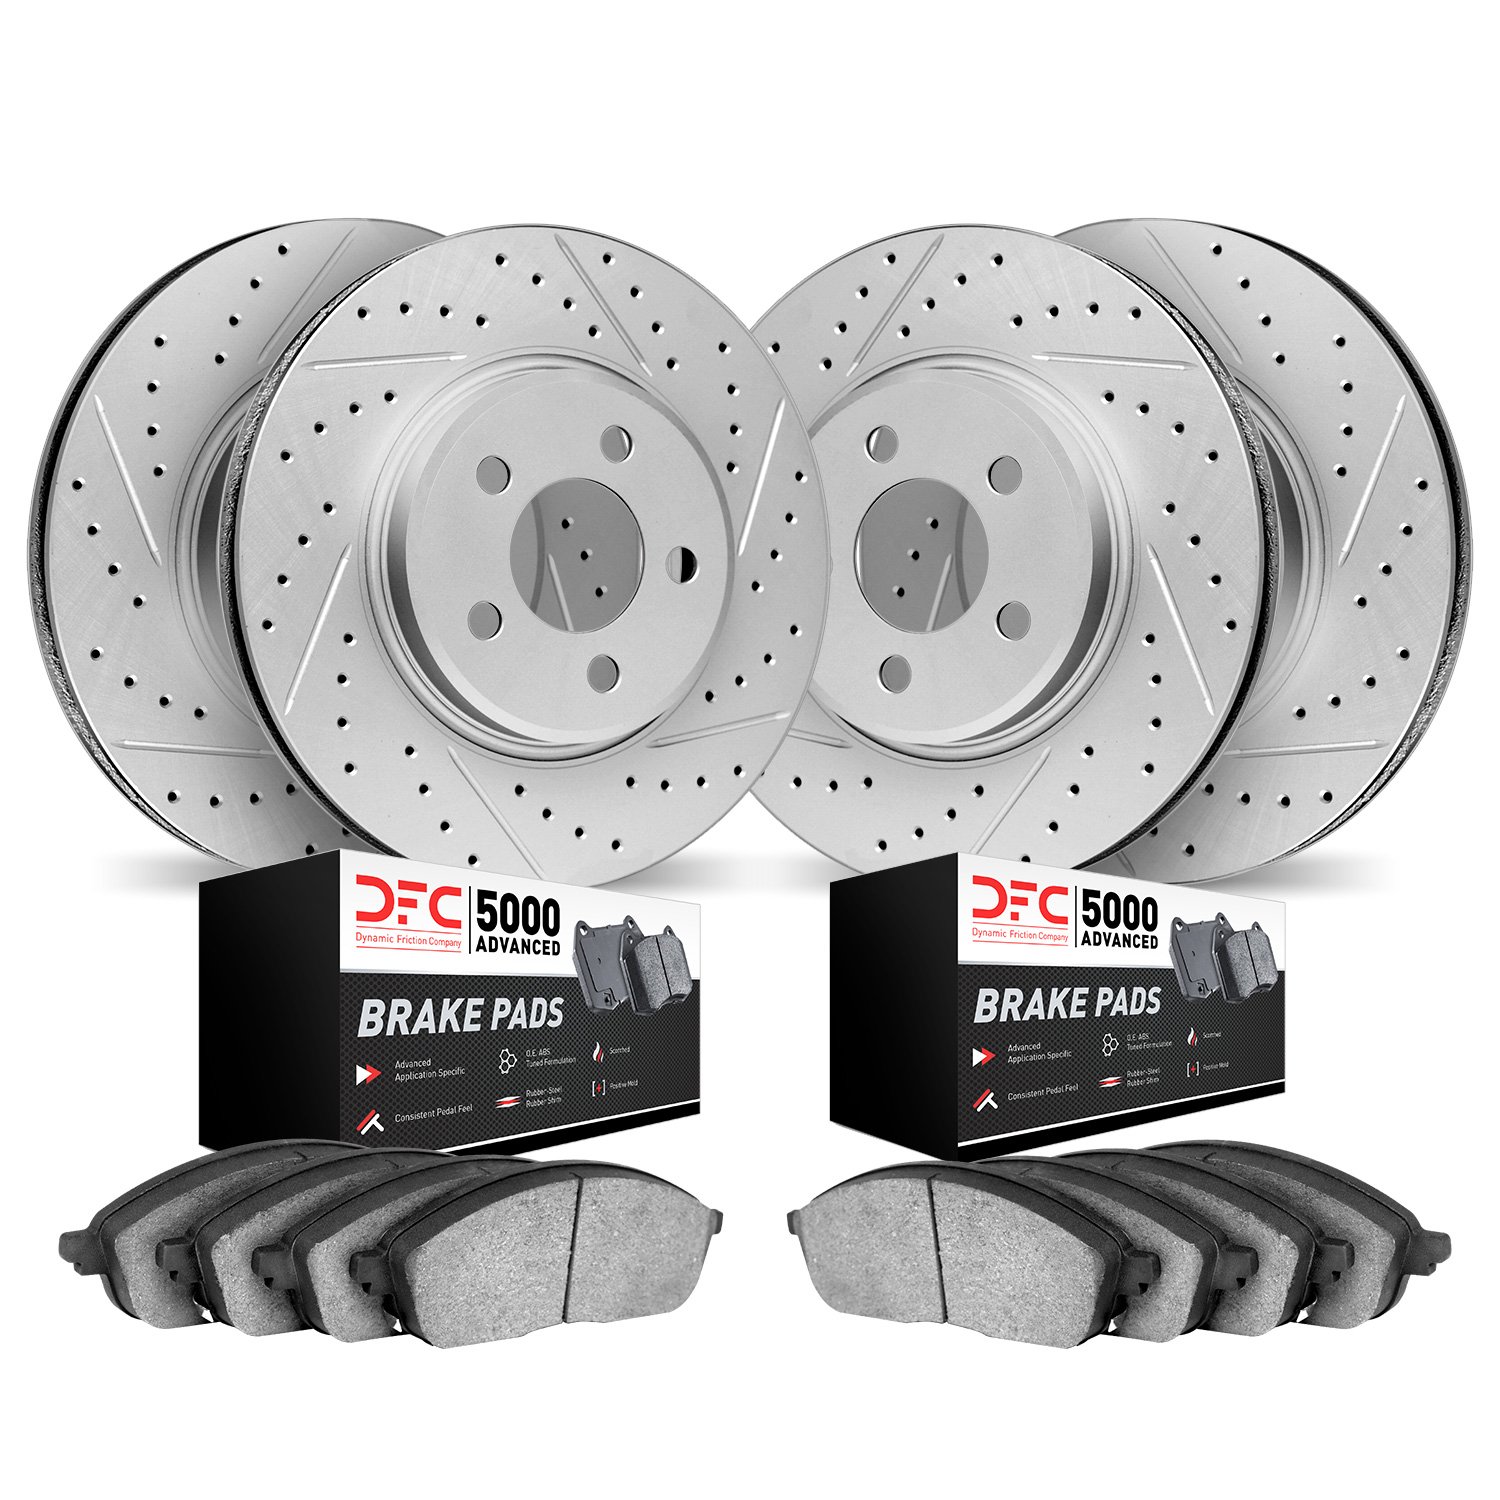 2504-42058 Geoperformance Drilled/Slotted Rotors w/5000 Advanced Brake Pads Kit, 2006-2010 Mopar, Position: Front and Rear